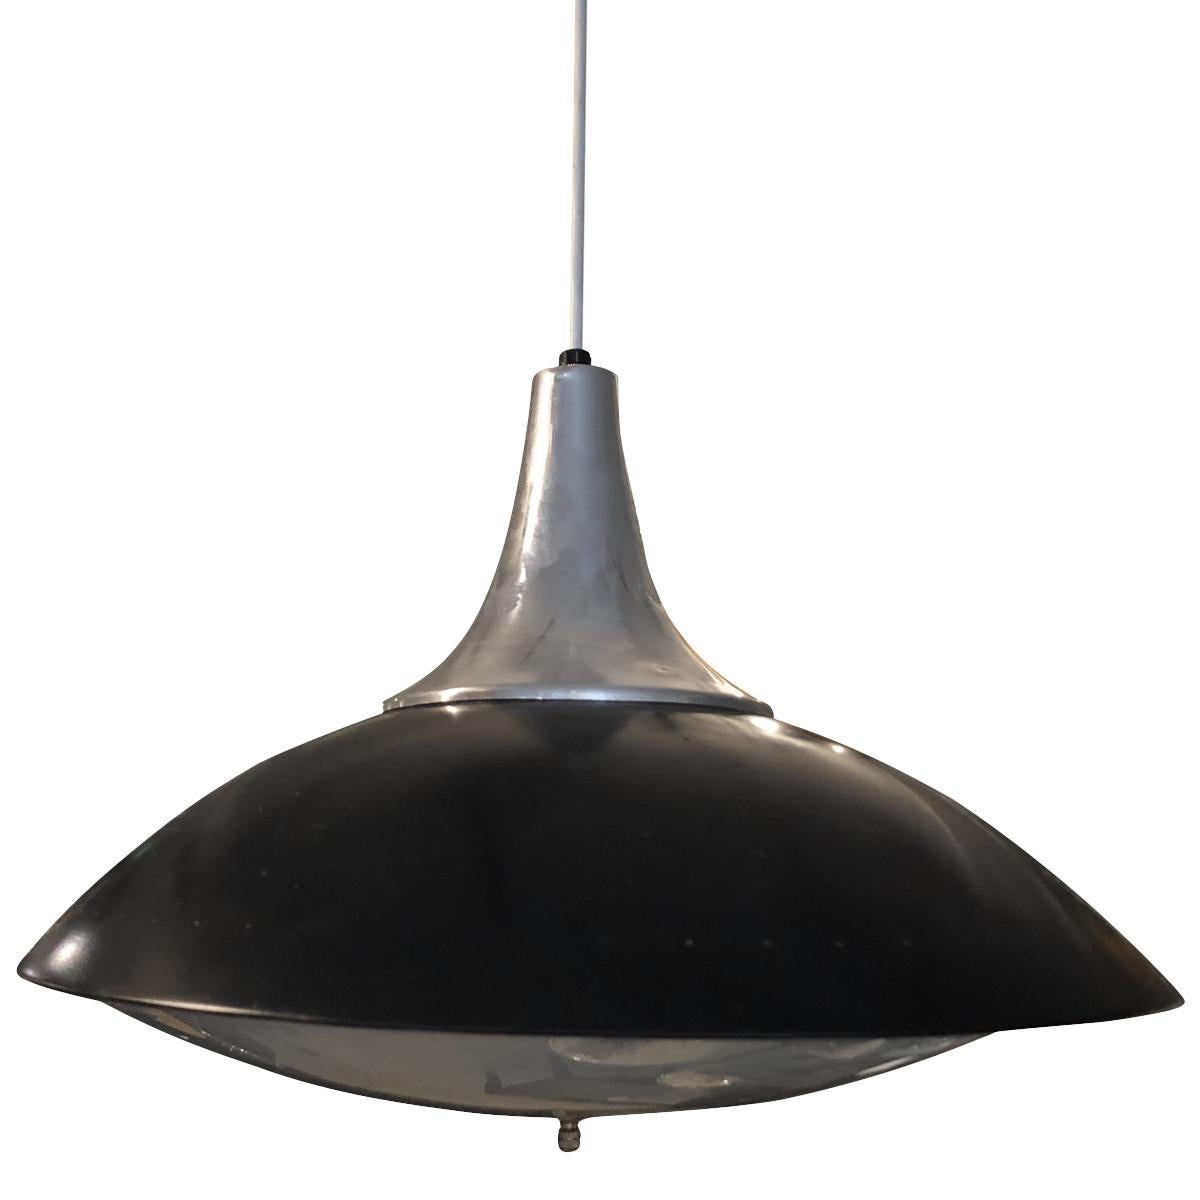 This flying saucer pendant is effortlessly chic and stylish. The pendant is made from black metal and features an aluminum cap with white rubber-covered wire and white rubber-covered cord. It can be hardwired or plugged-in. Add some elegant,